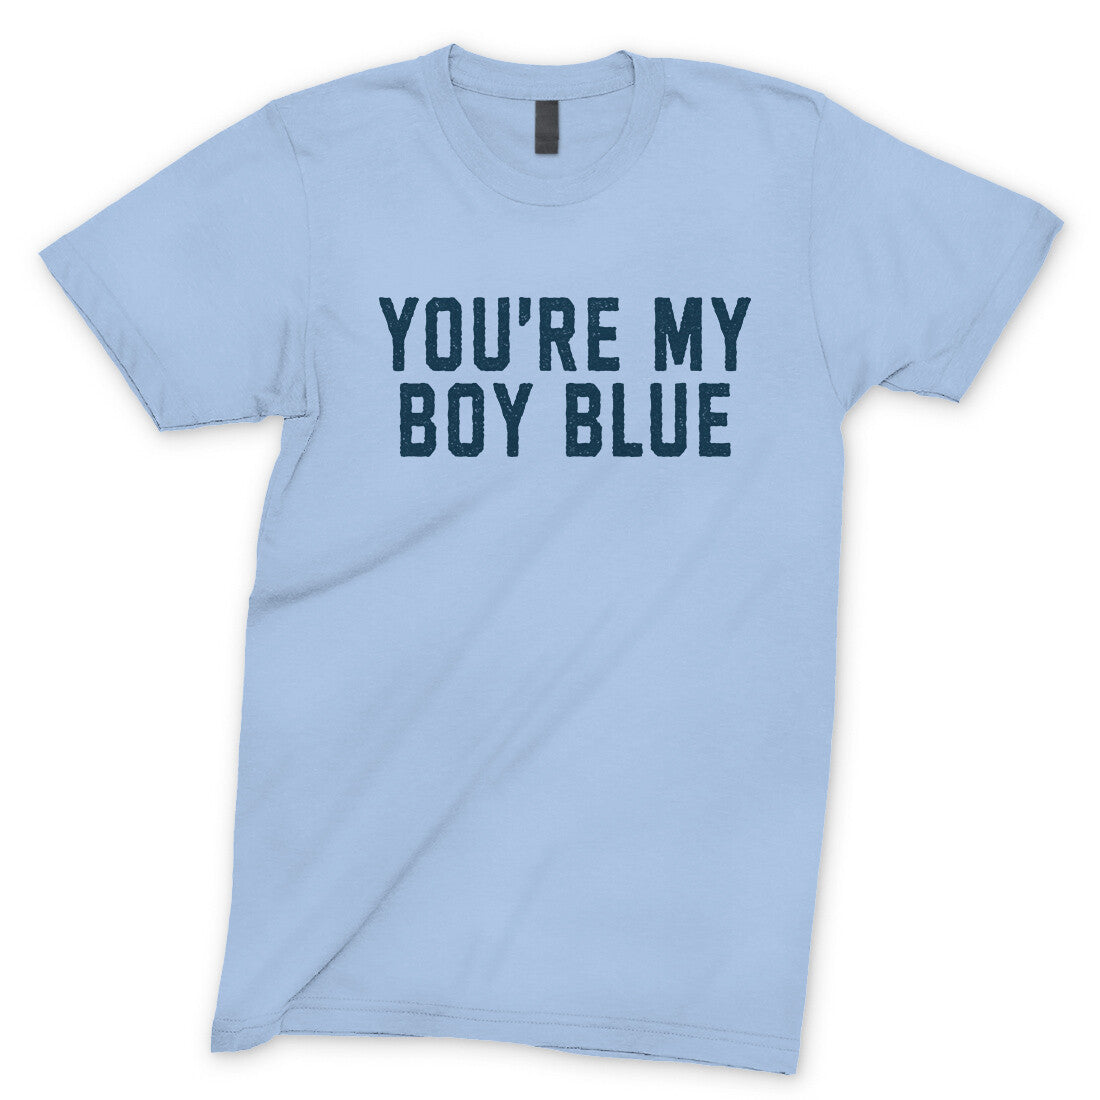 You're my Boy Blue in Light Blue Color